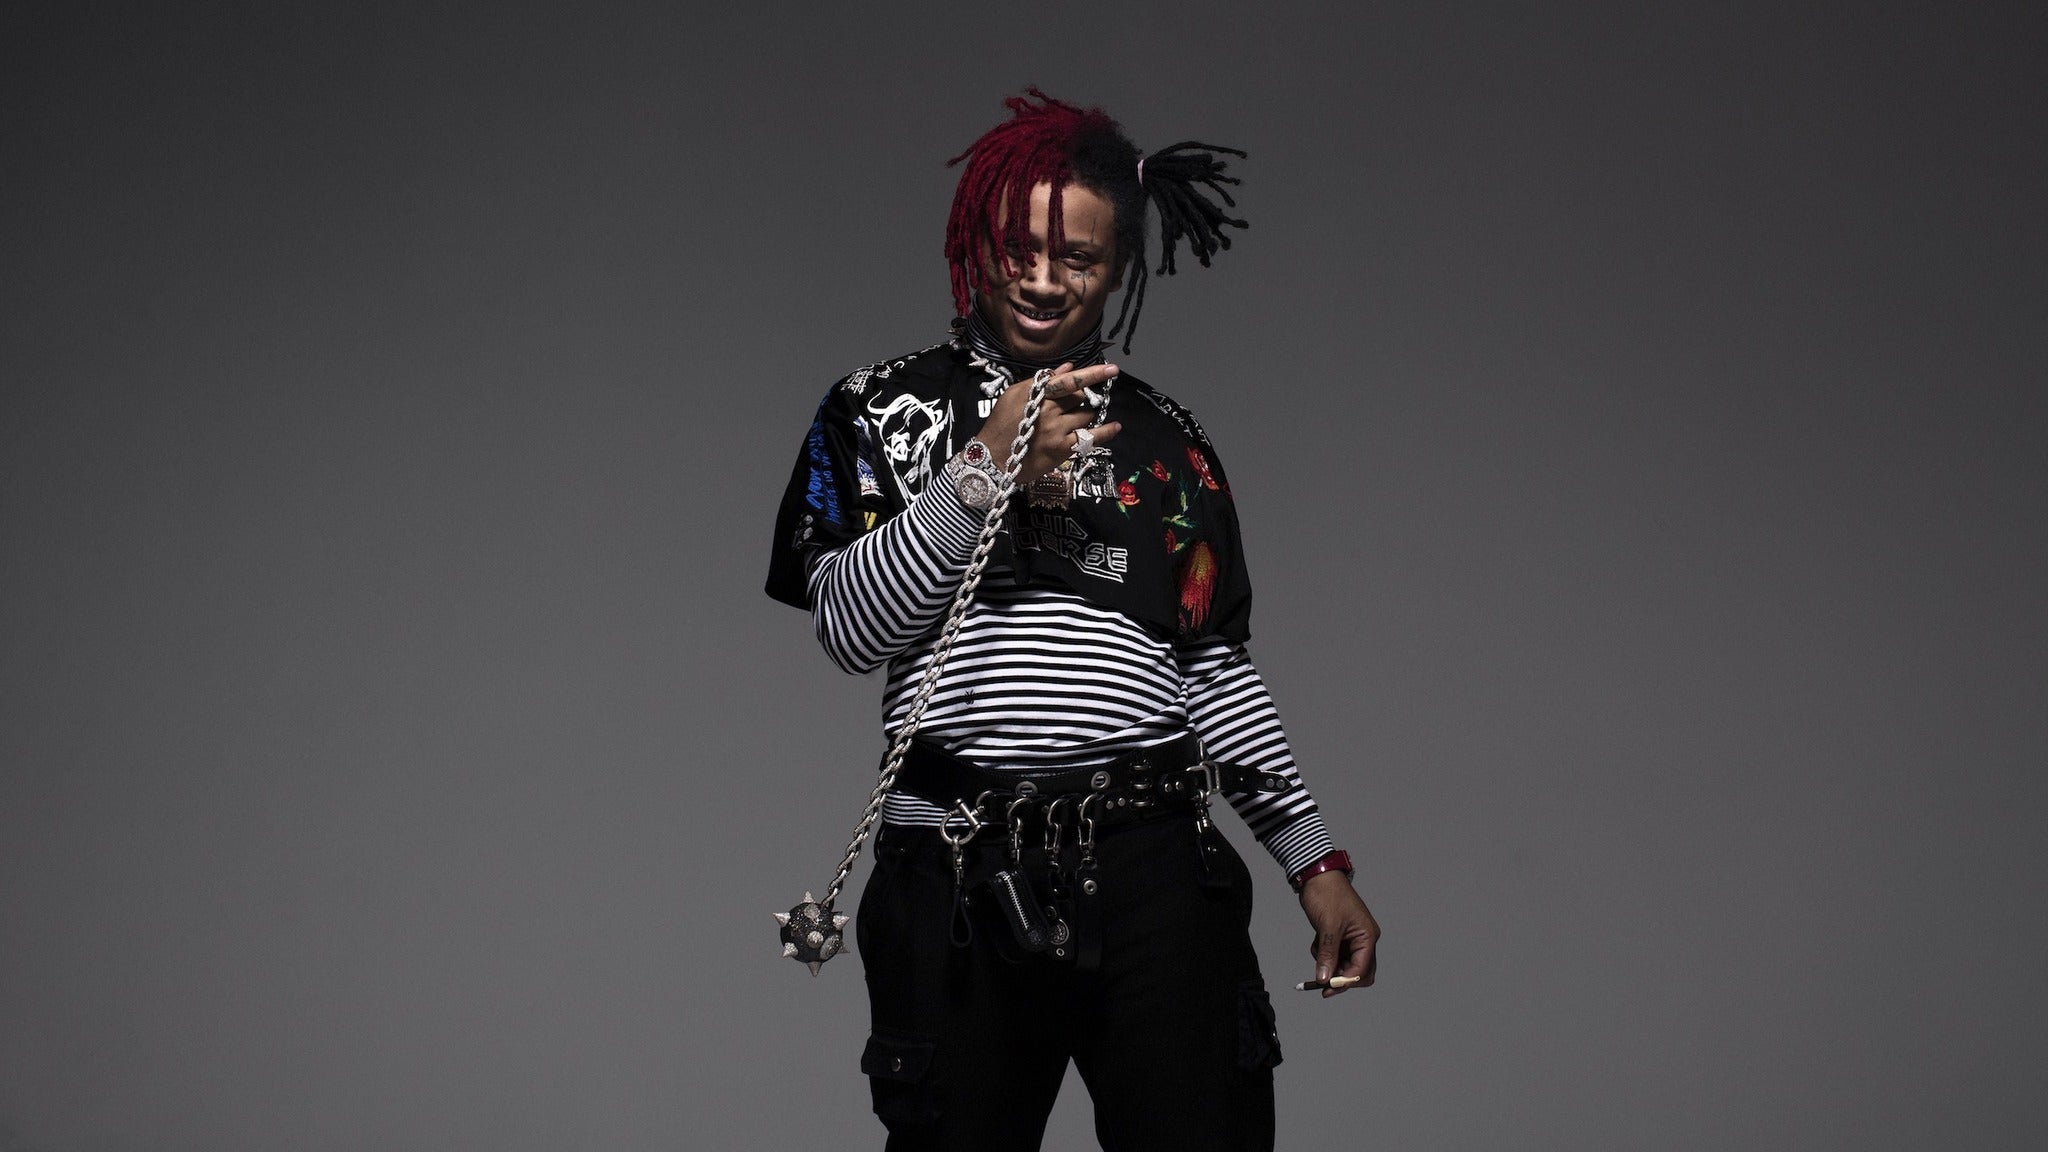 Trippie Redd - Life's a Trip Tour in New York promo photo for Live Nation Mobile App presale offer code